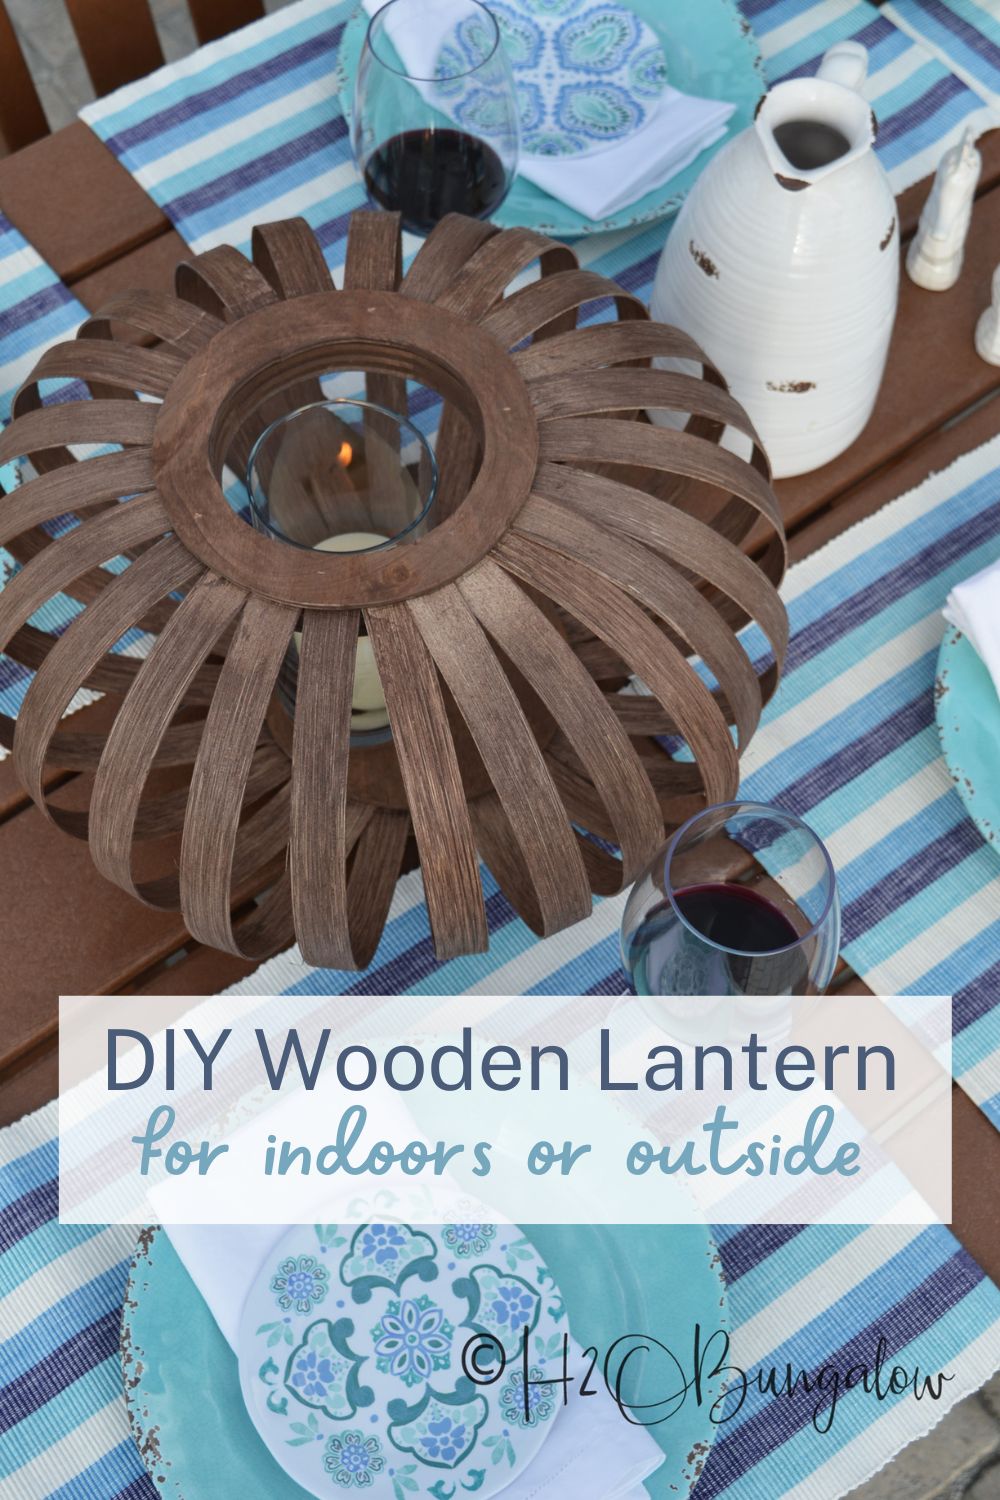 DIY wooden lantern on outdoor dining table with candle 